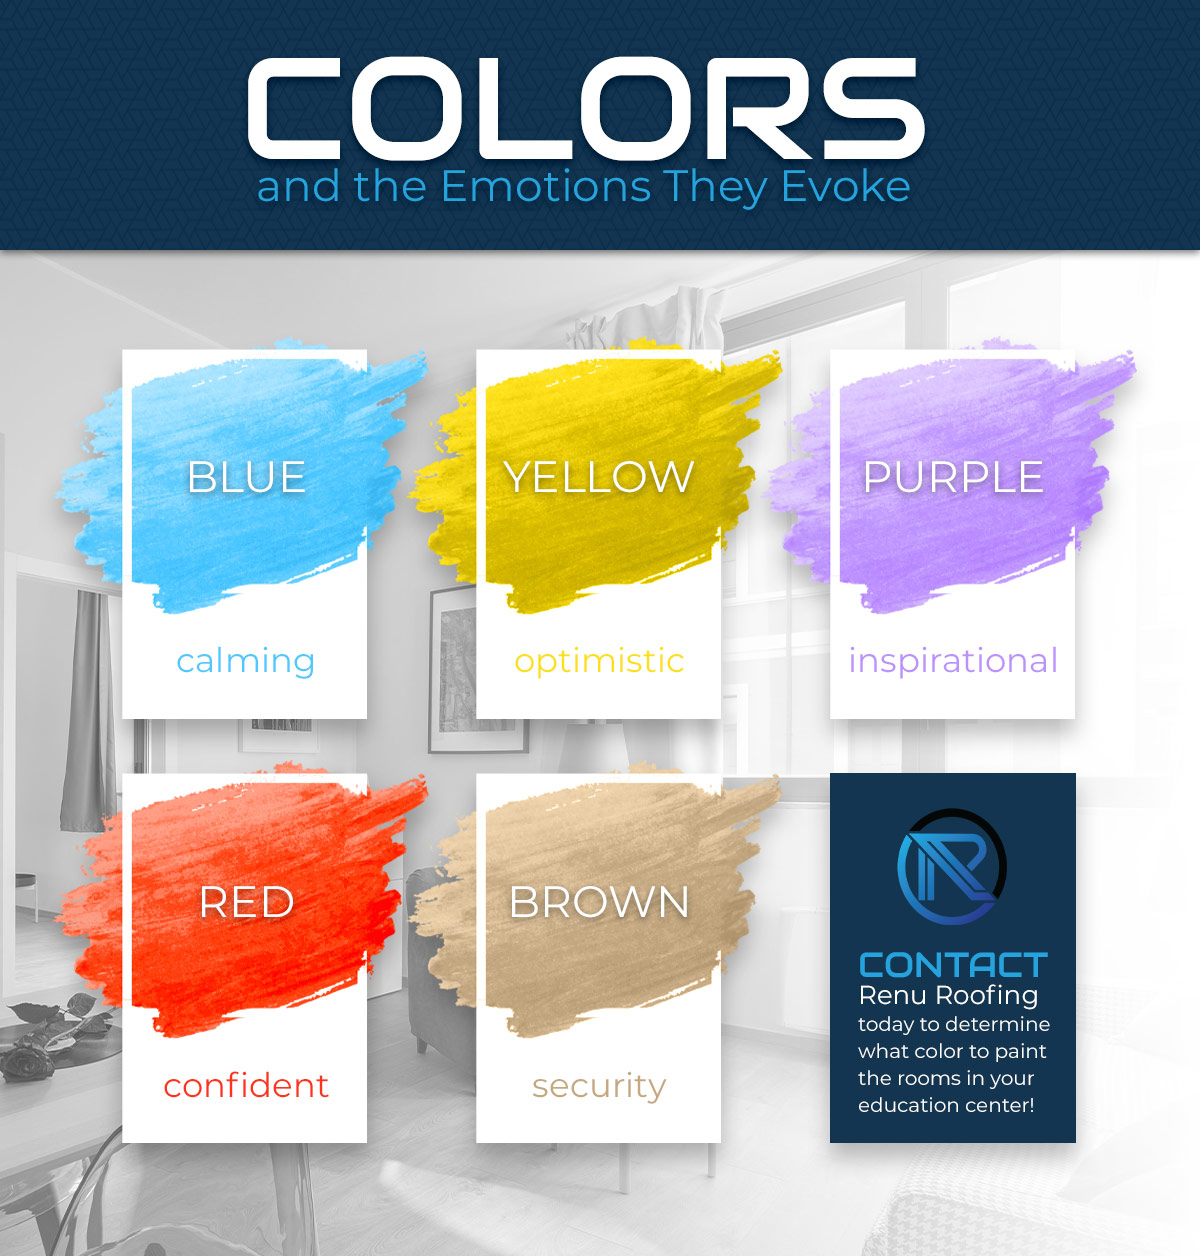 Colors-and-the-Emotions-They-Evoke-Infographic-5f8efe2f4a7b6.jpg